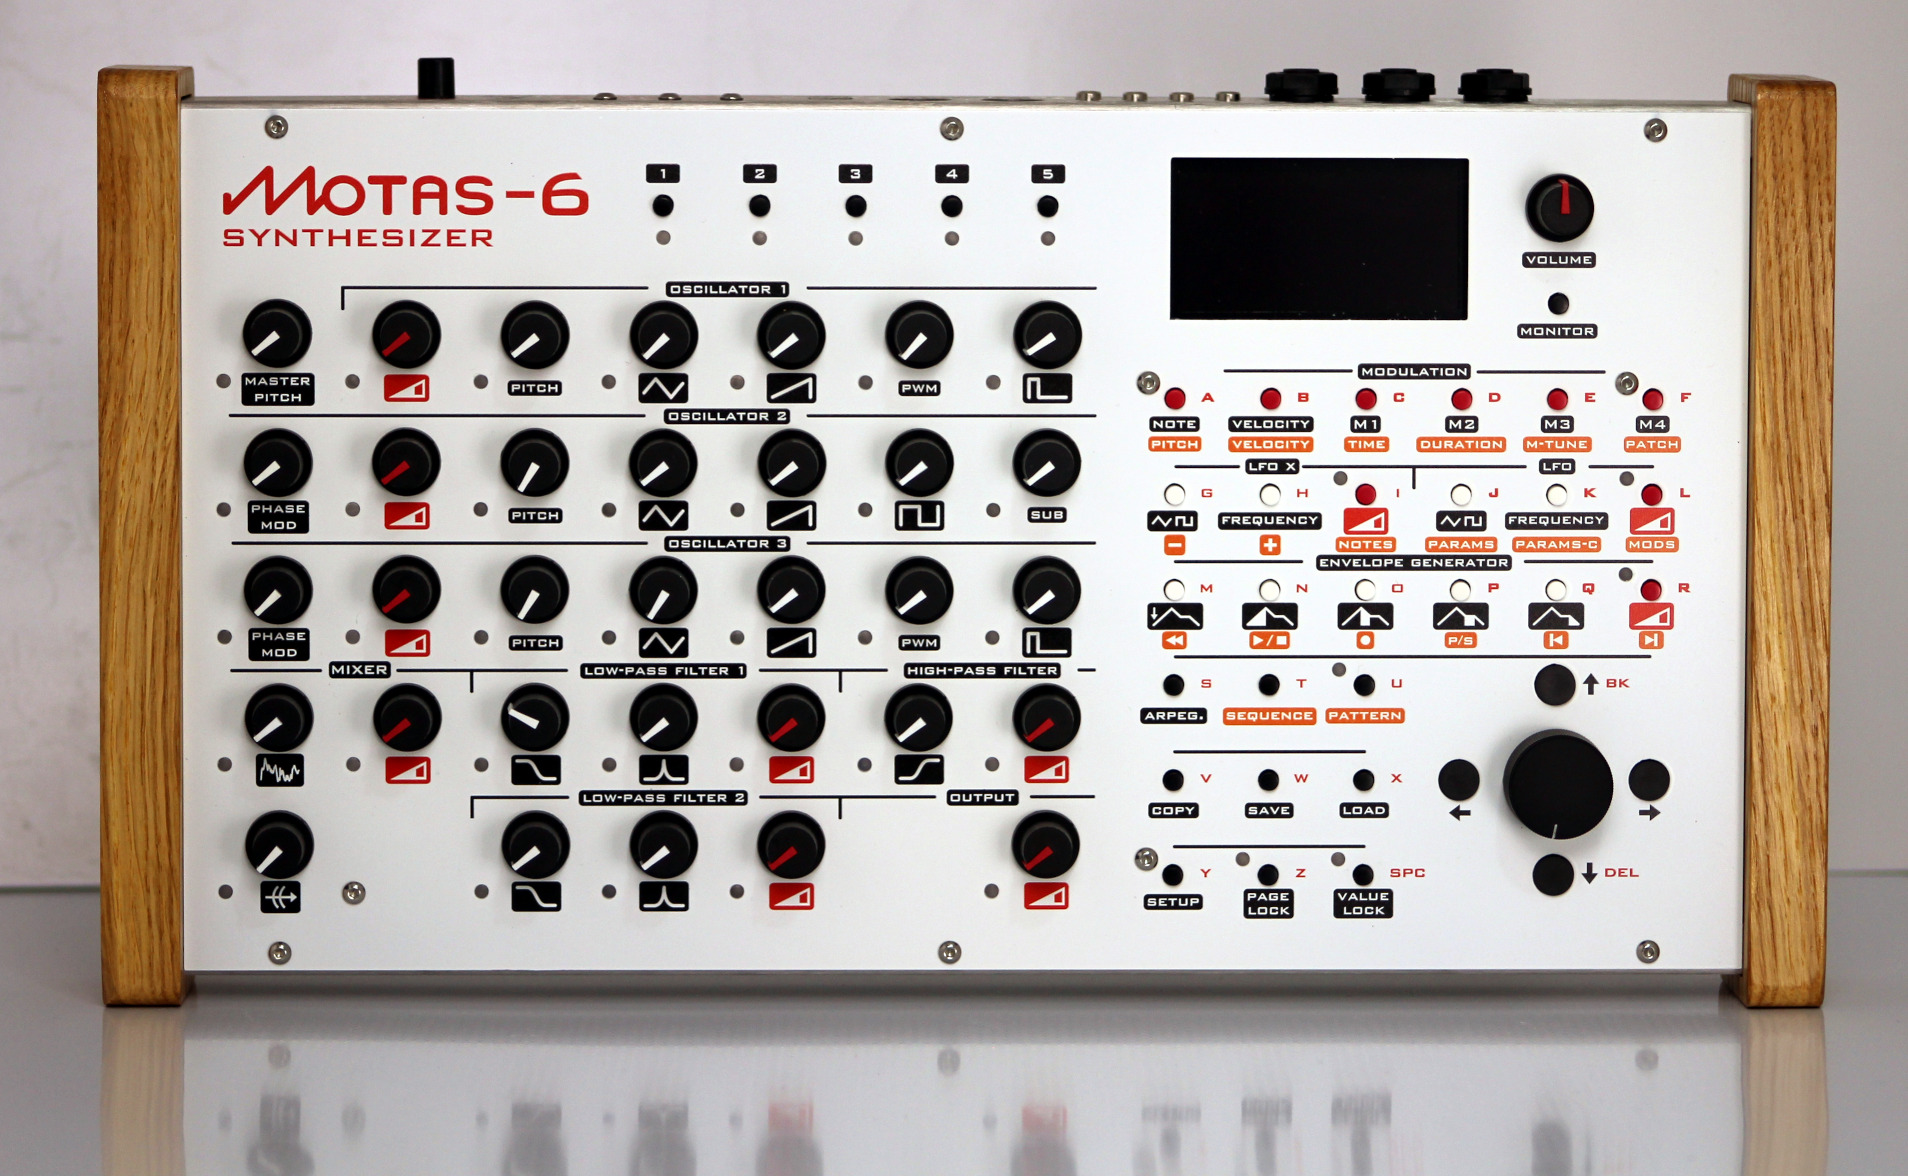 Motas-6 image in white painted finish